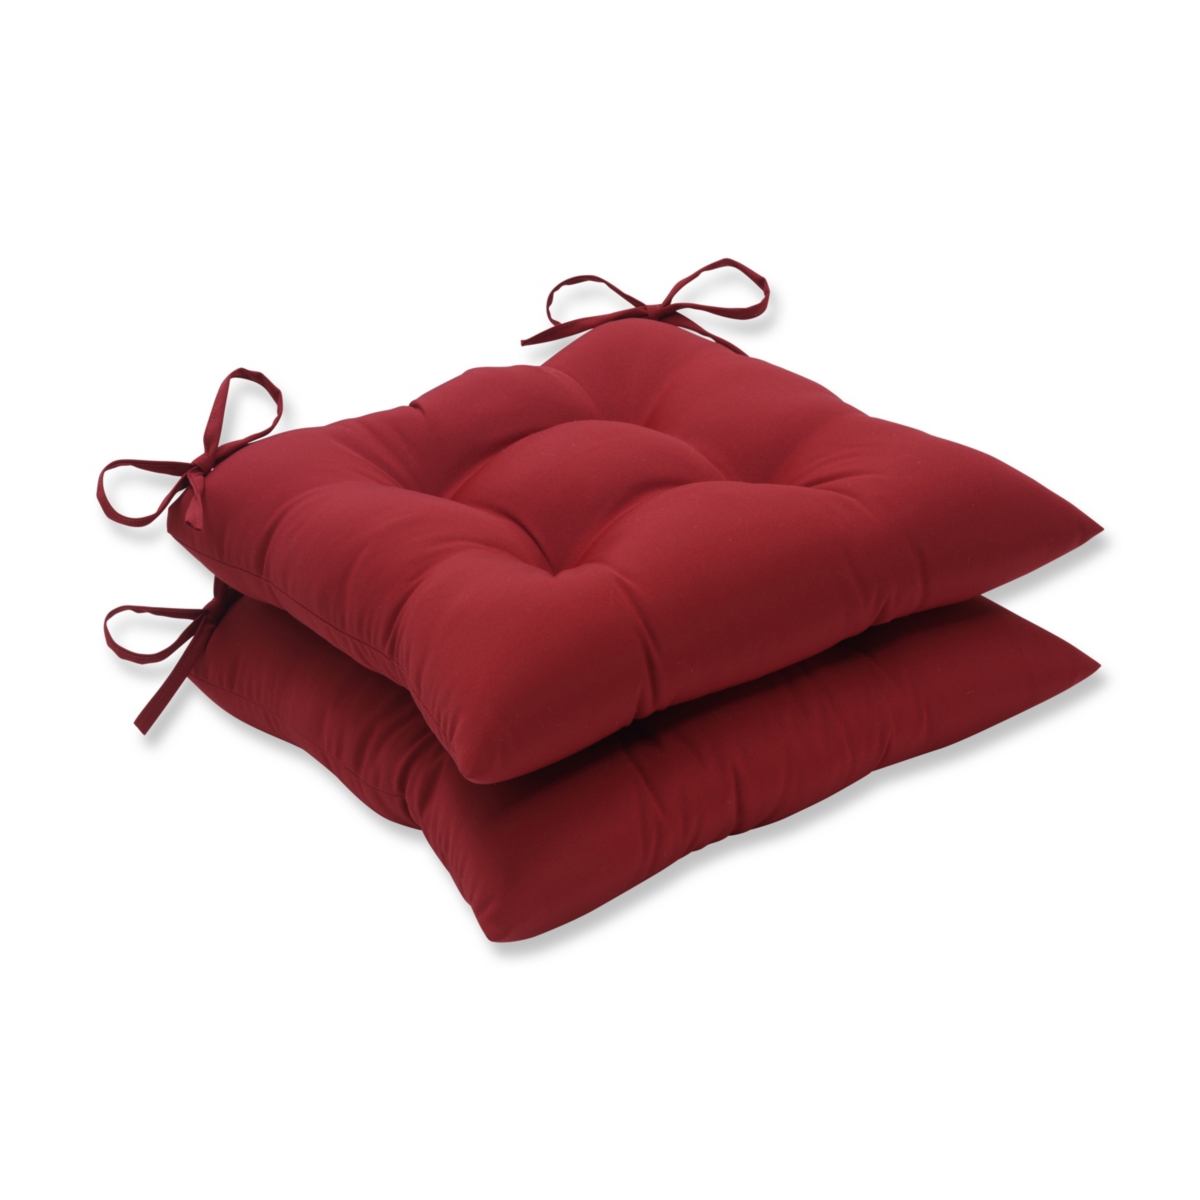 Pompeii Red Wrought Iron Seat Cushion, Set of 2 - Red